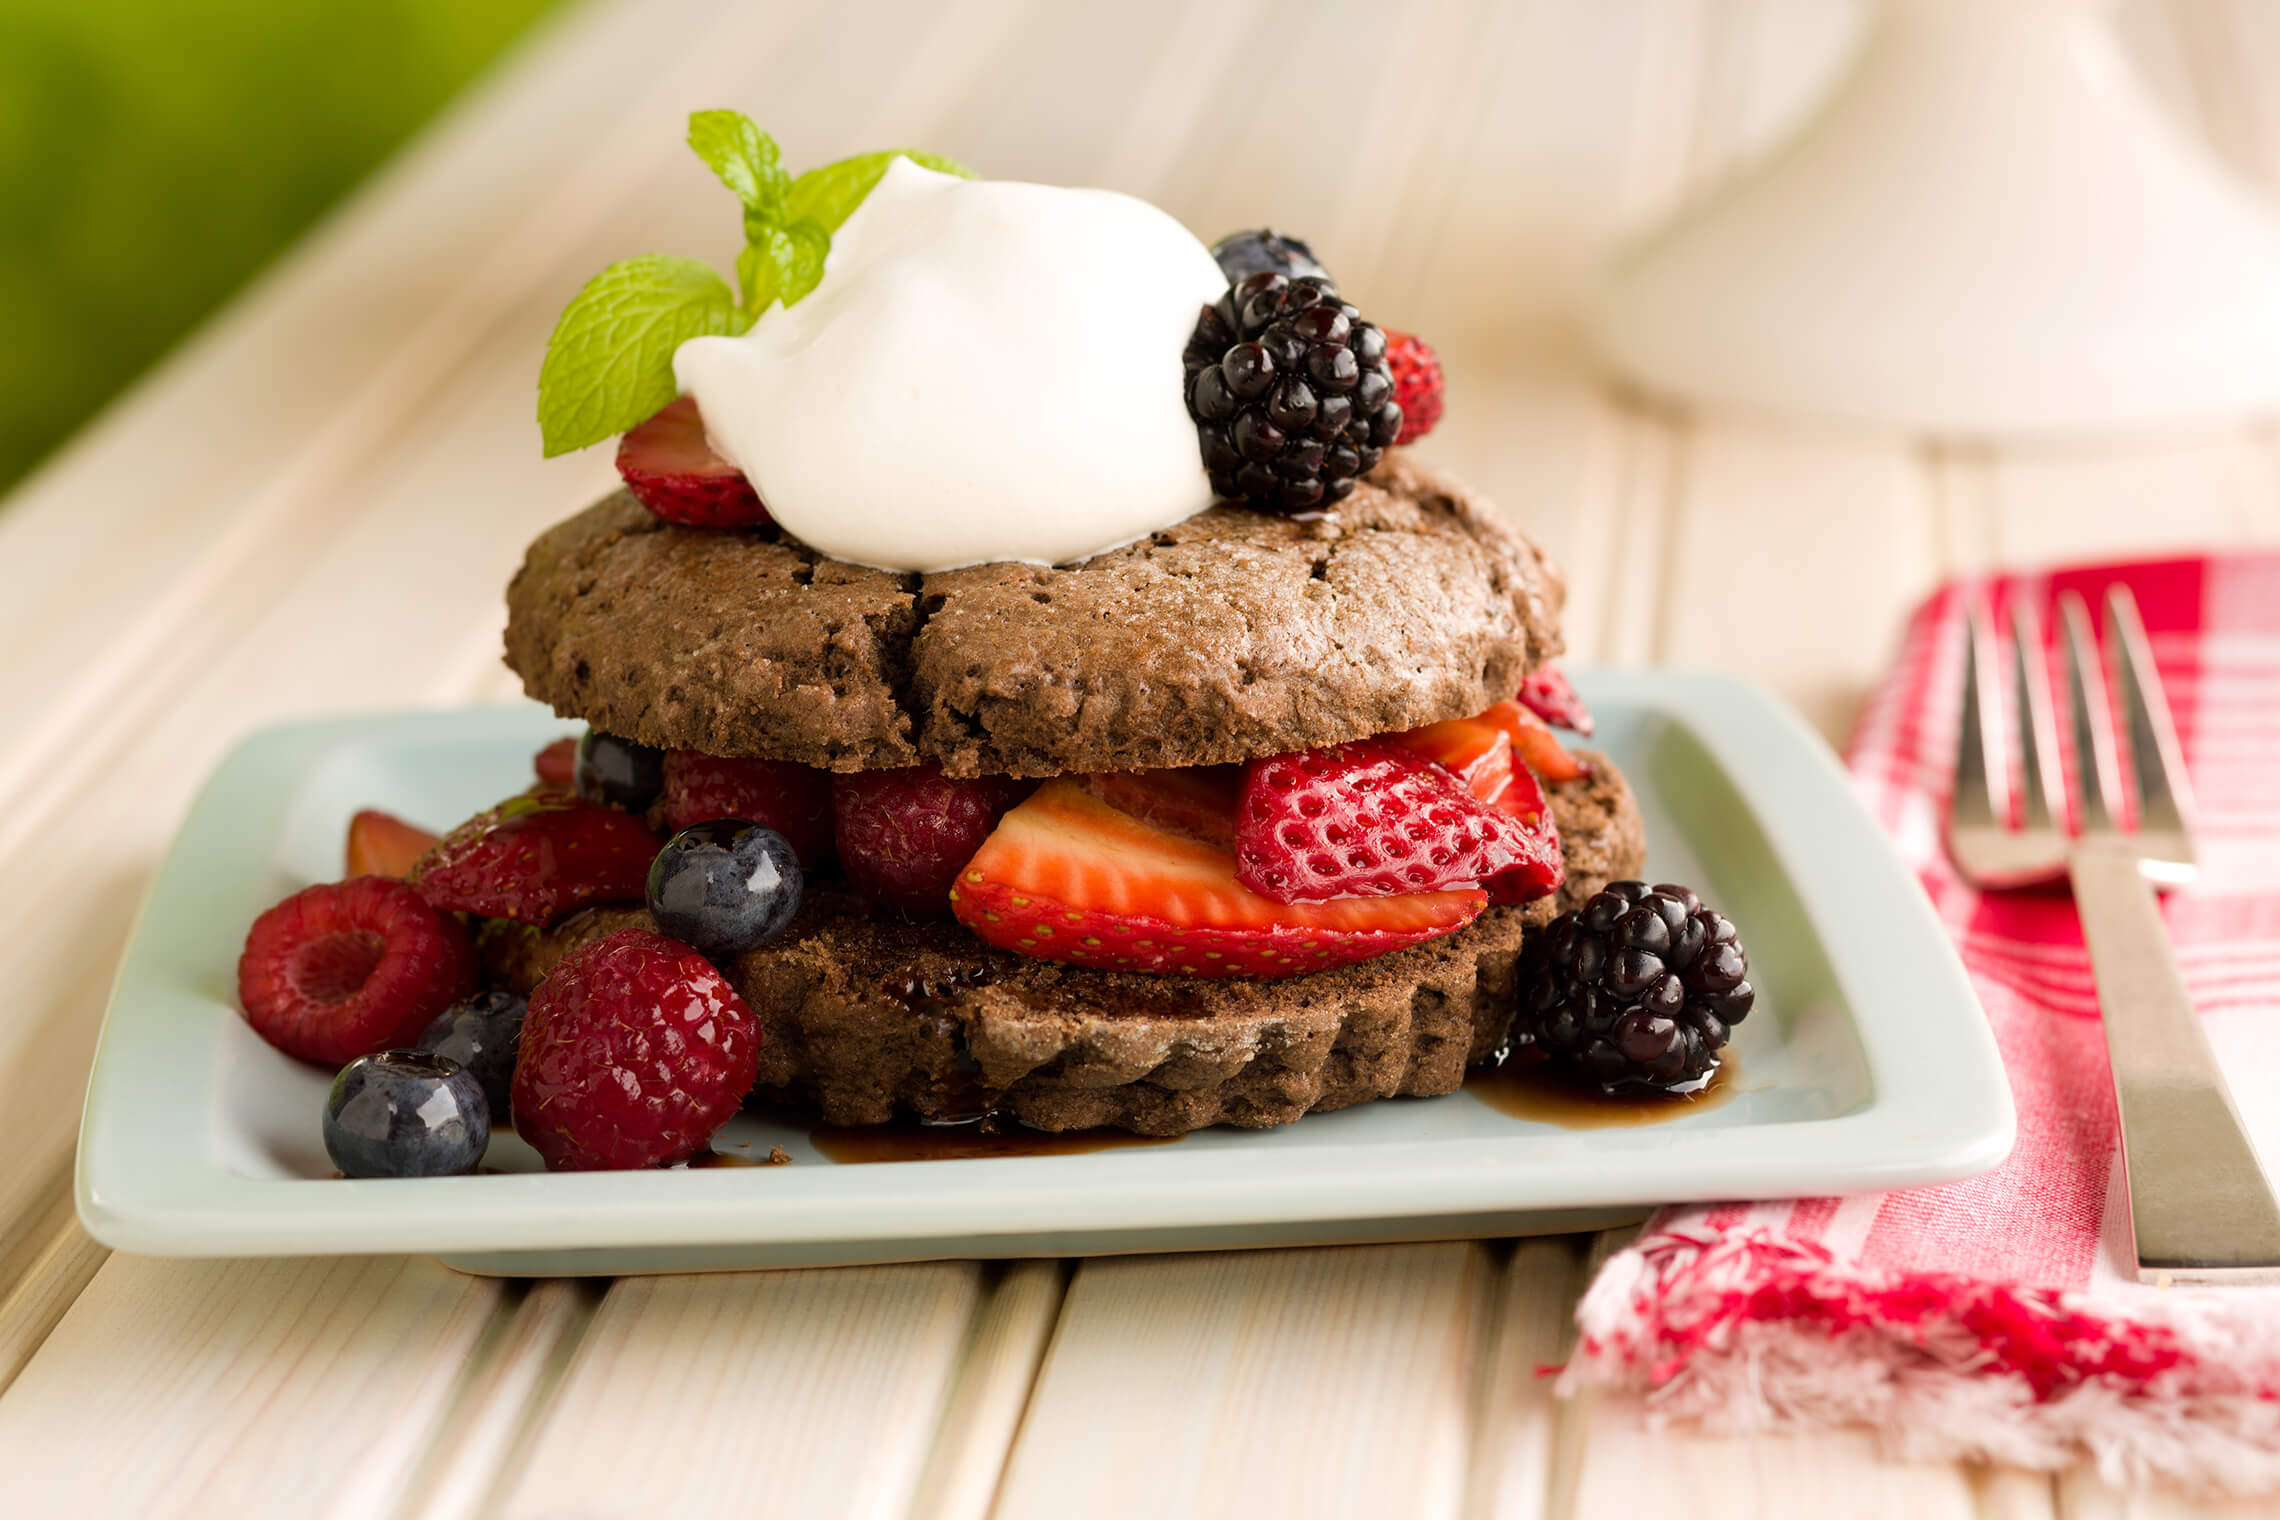 Chocolate Shortcake with Mixed Berries